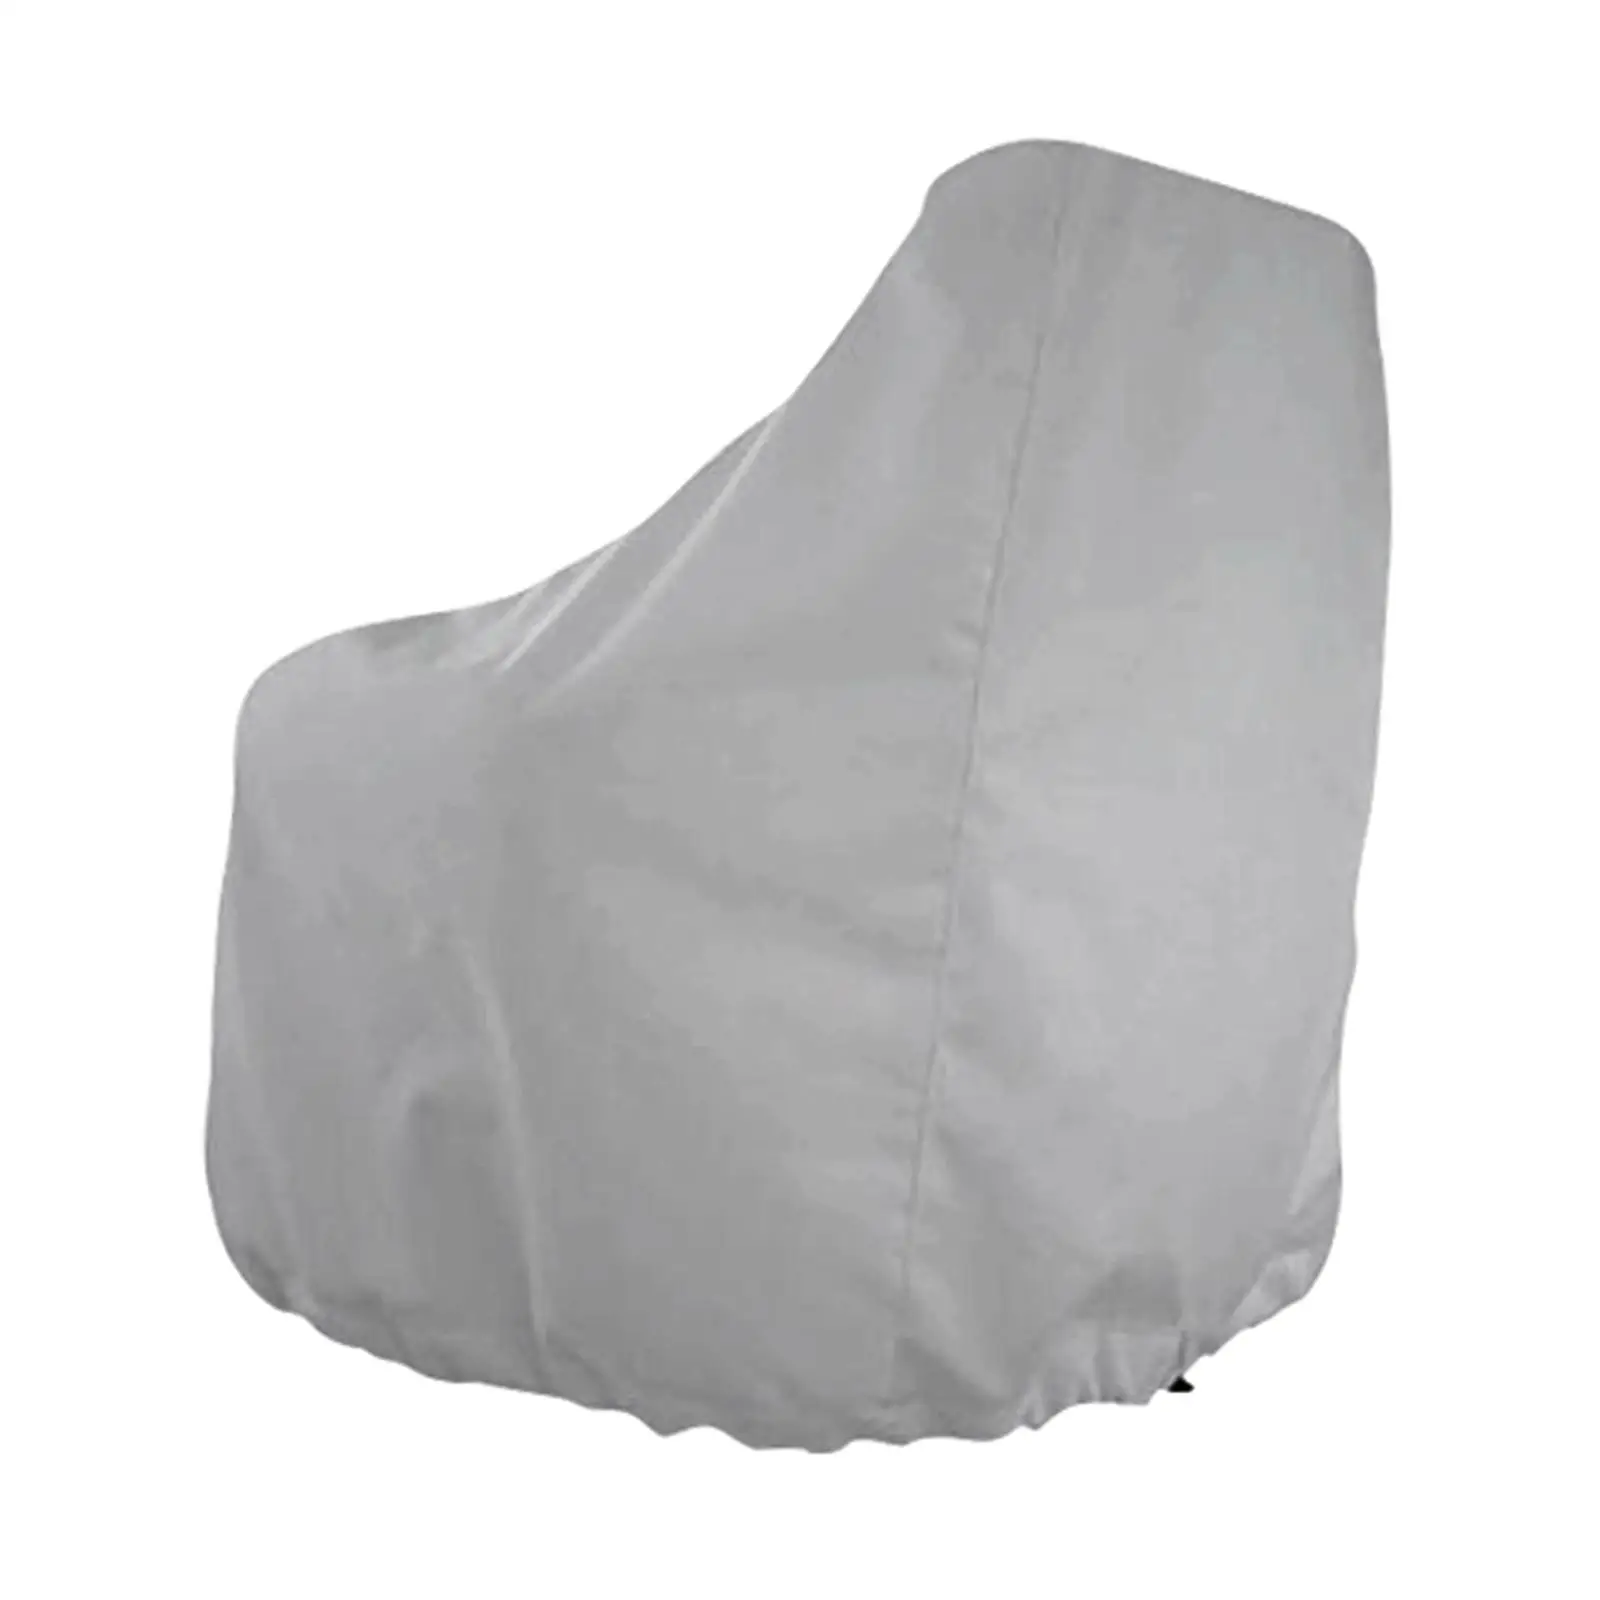 3X Boat Seat Cover Outdoor Yacht Waterproof Elastic Hem Protection Silver